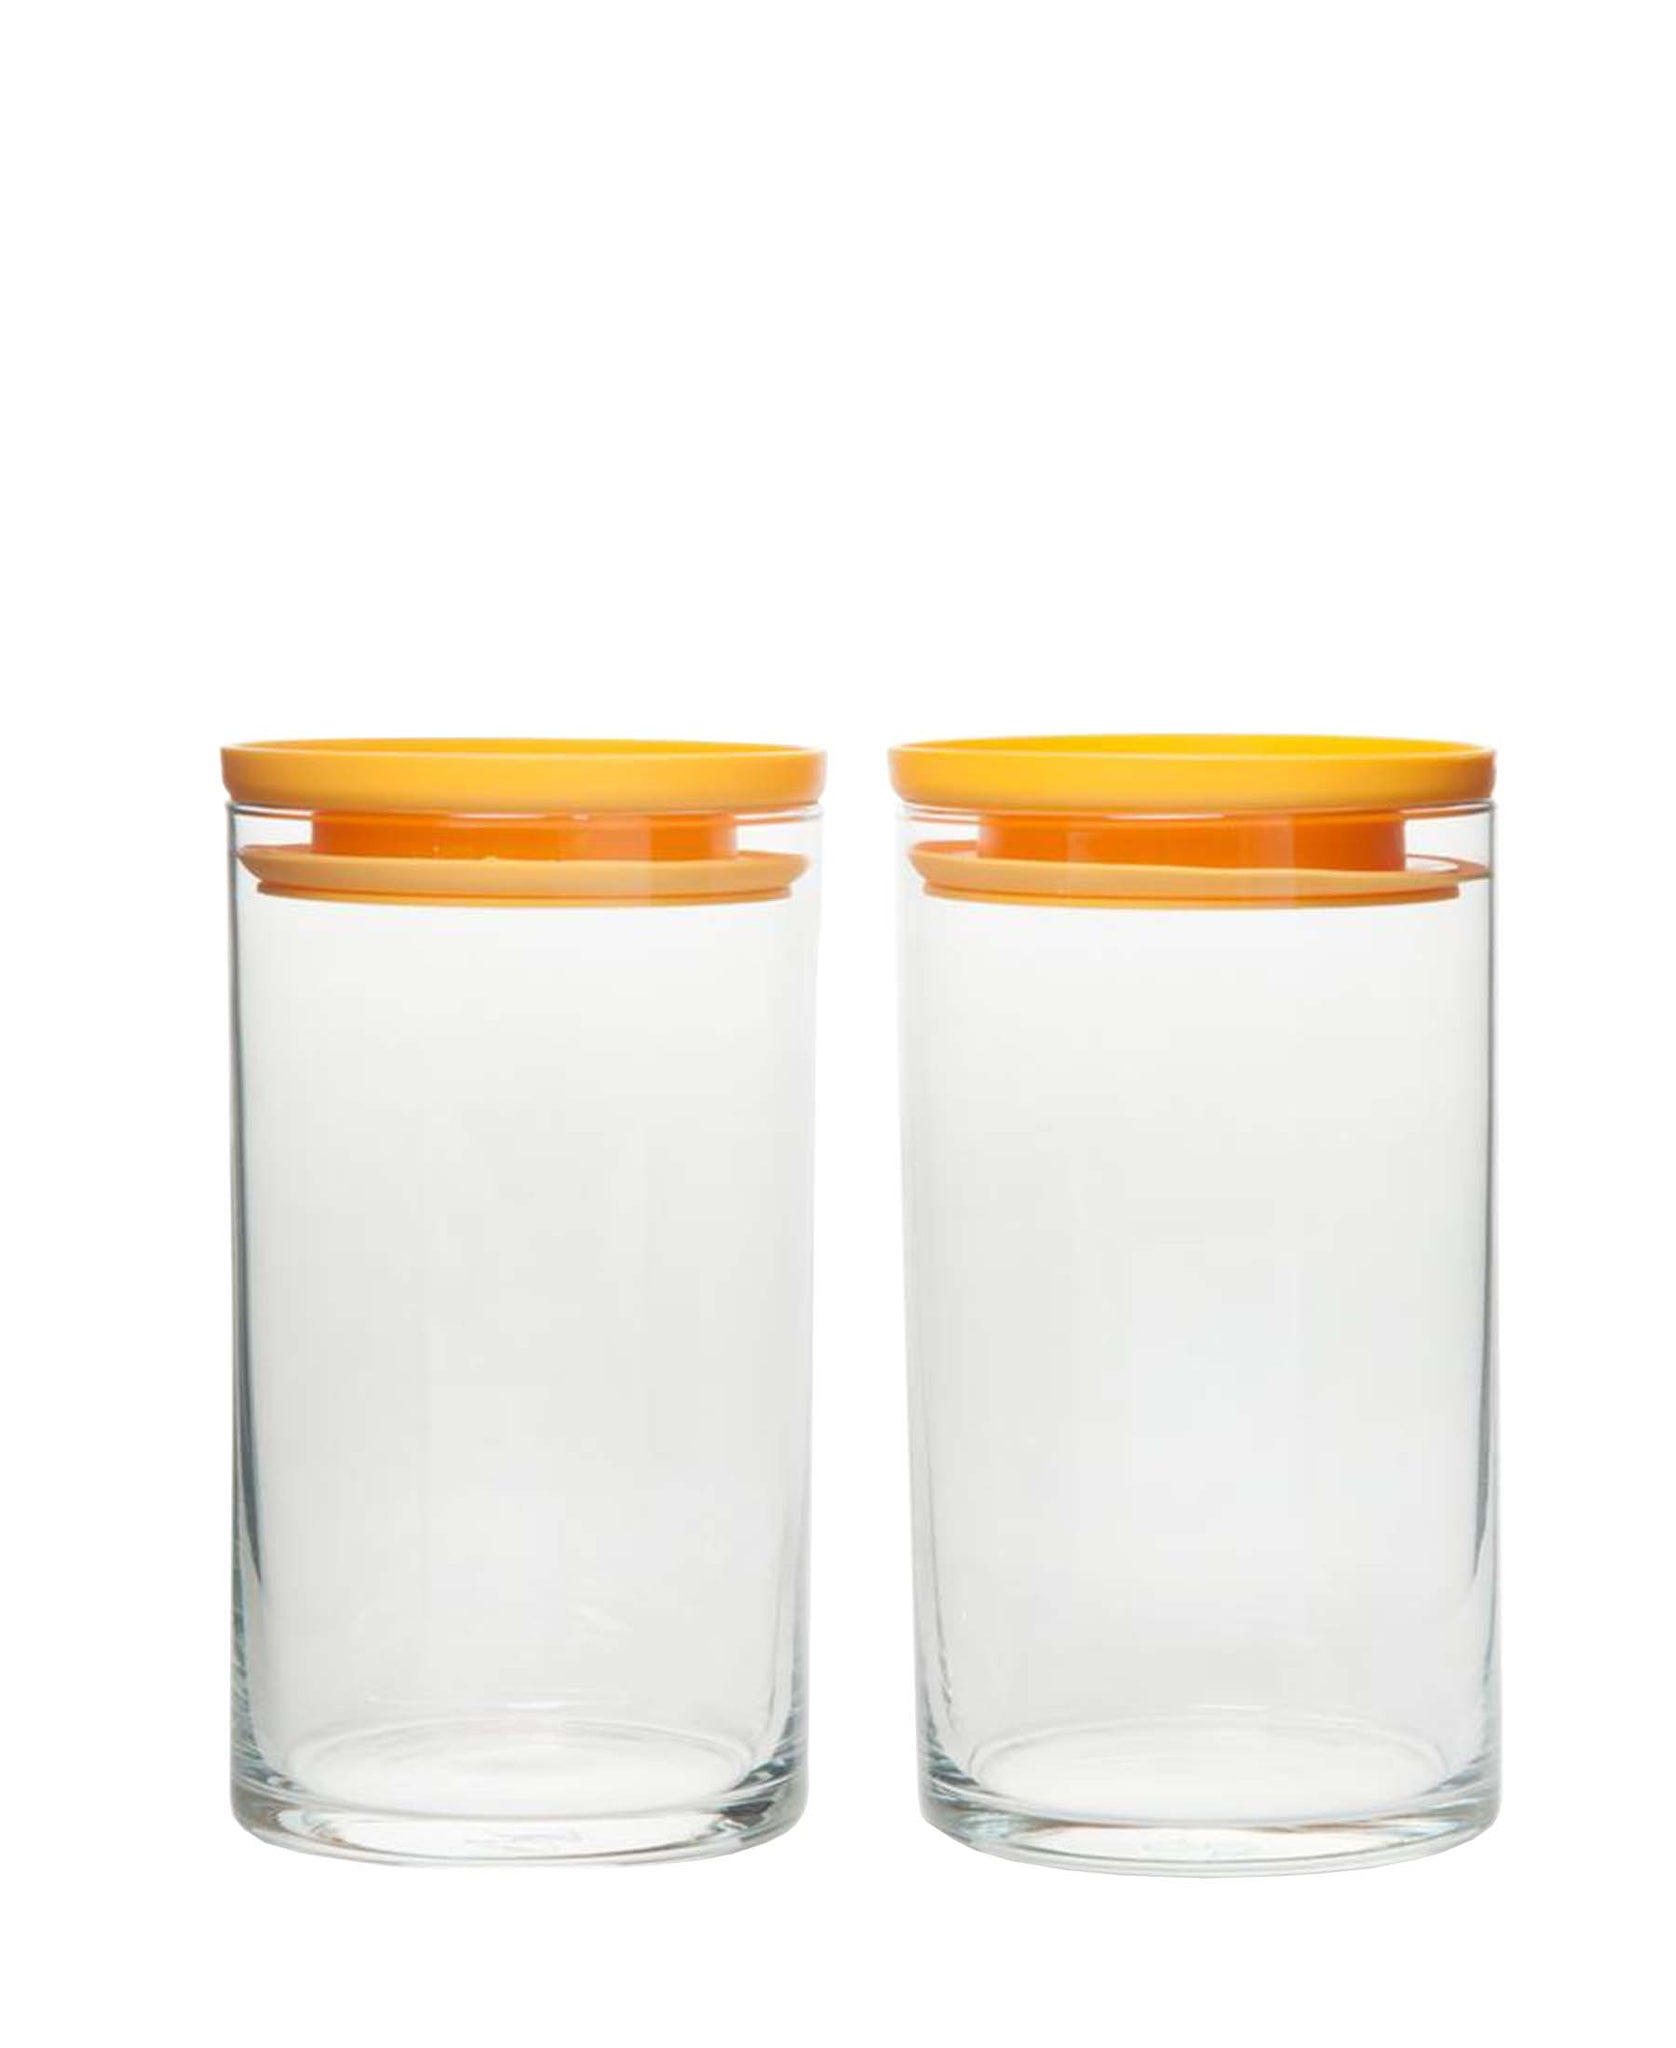 Kitchen Life 2 Piece 730ml Borosilicate Canister Set - Clear